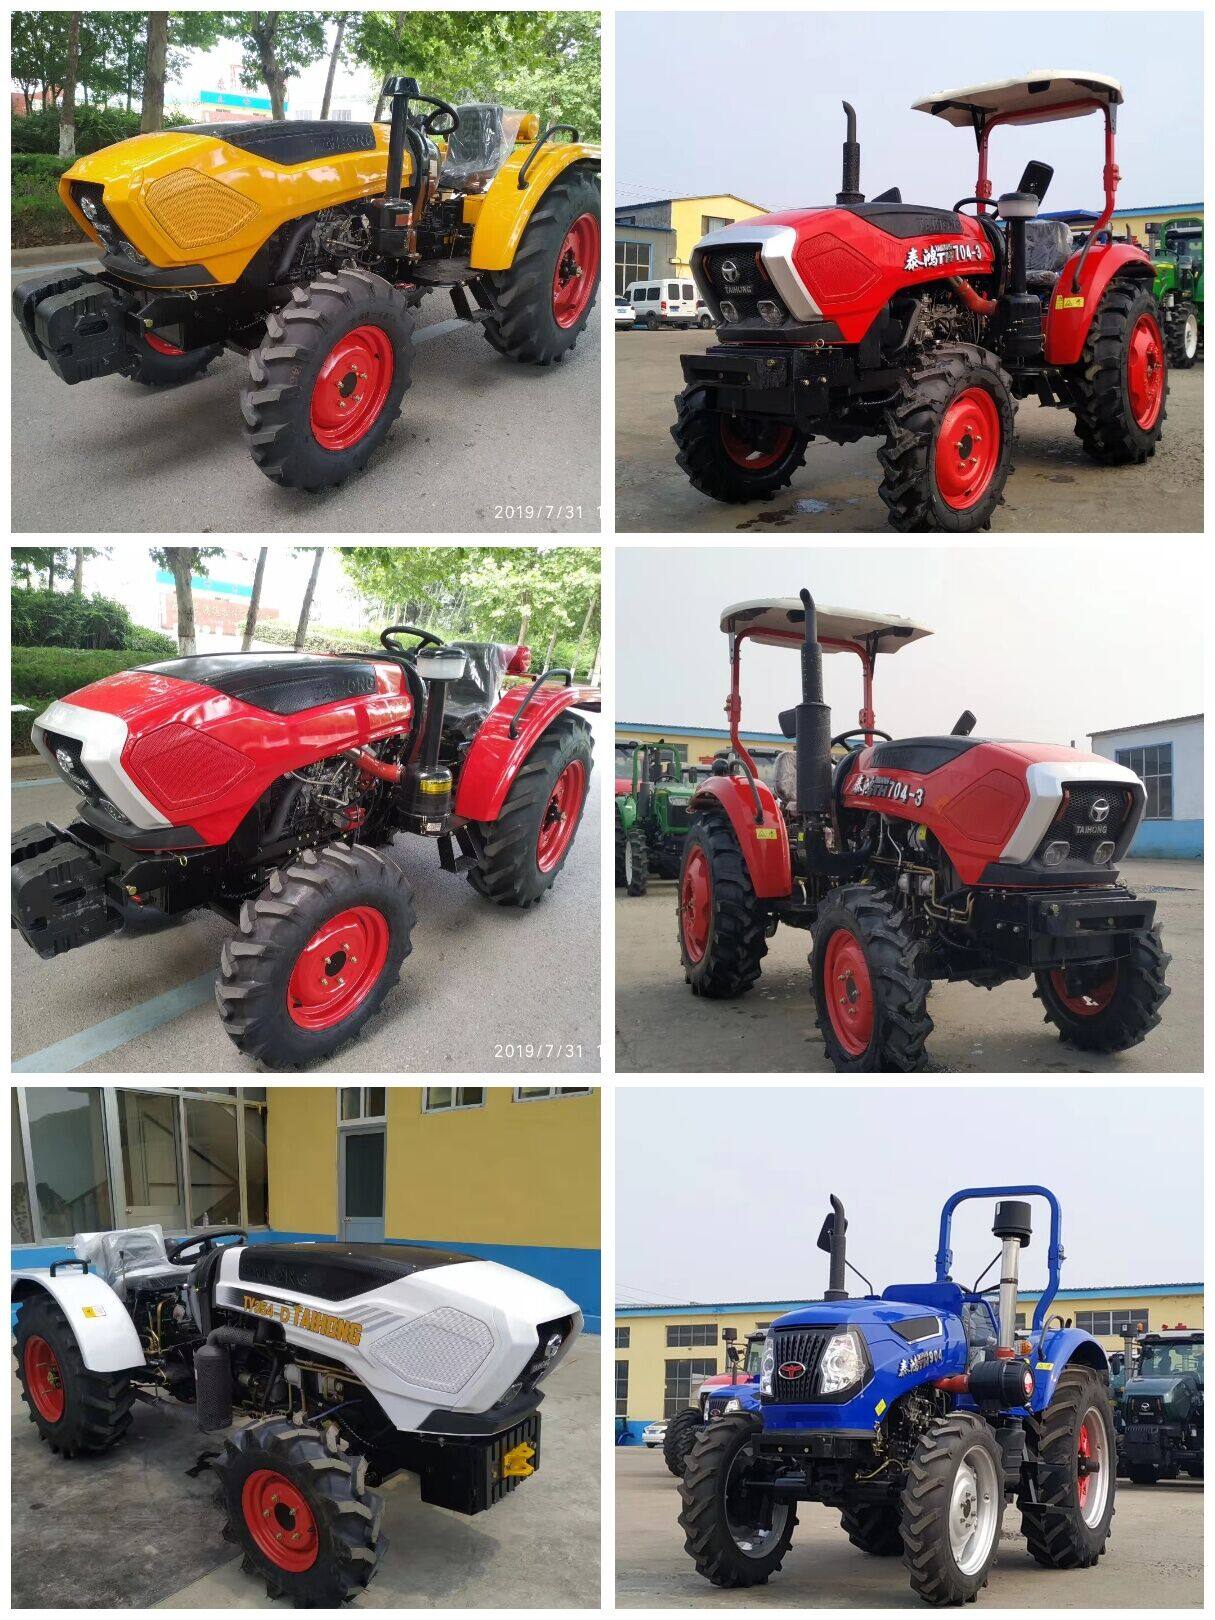 China Factory Supply 55HP 4WD Mini Small Agriculture Garden Orchard Farm Tractor